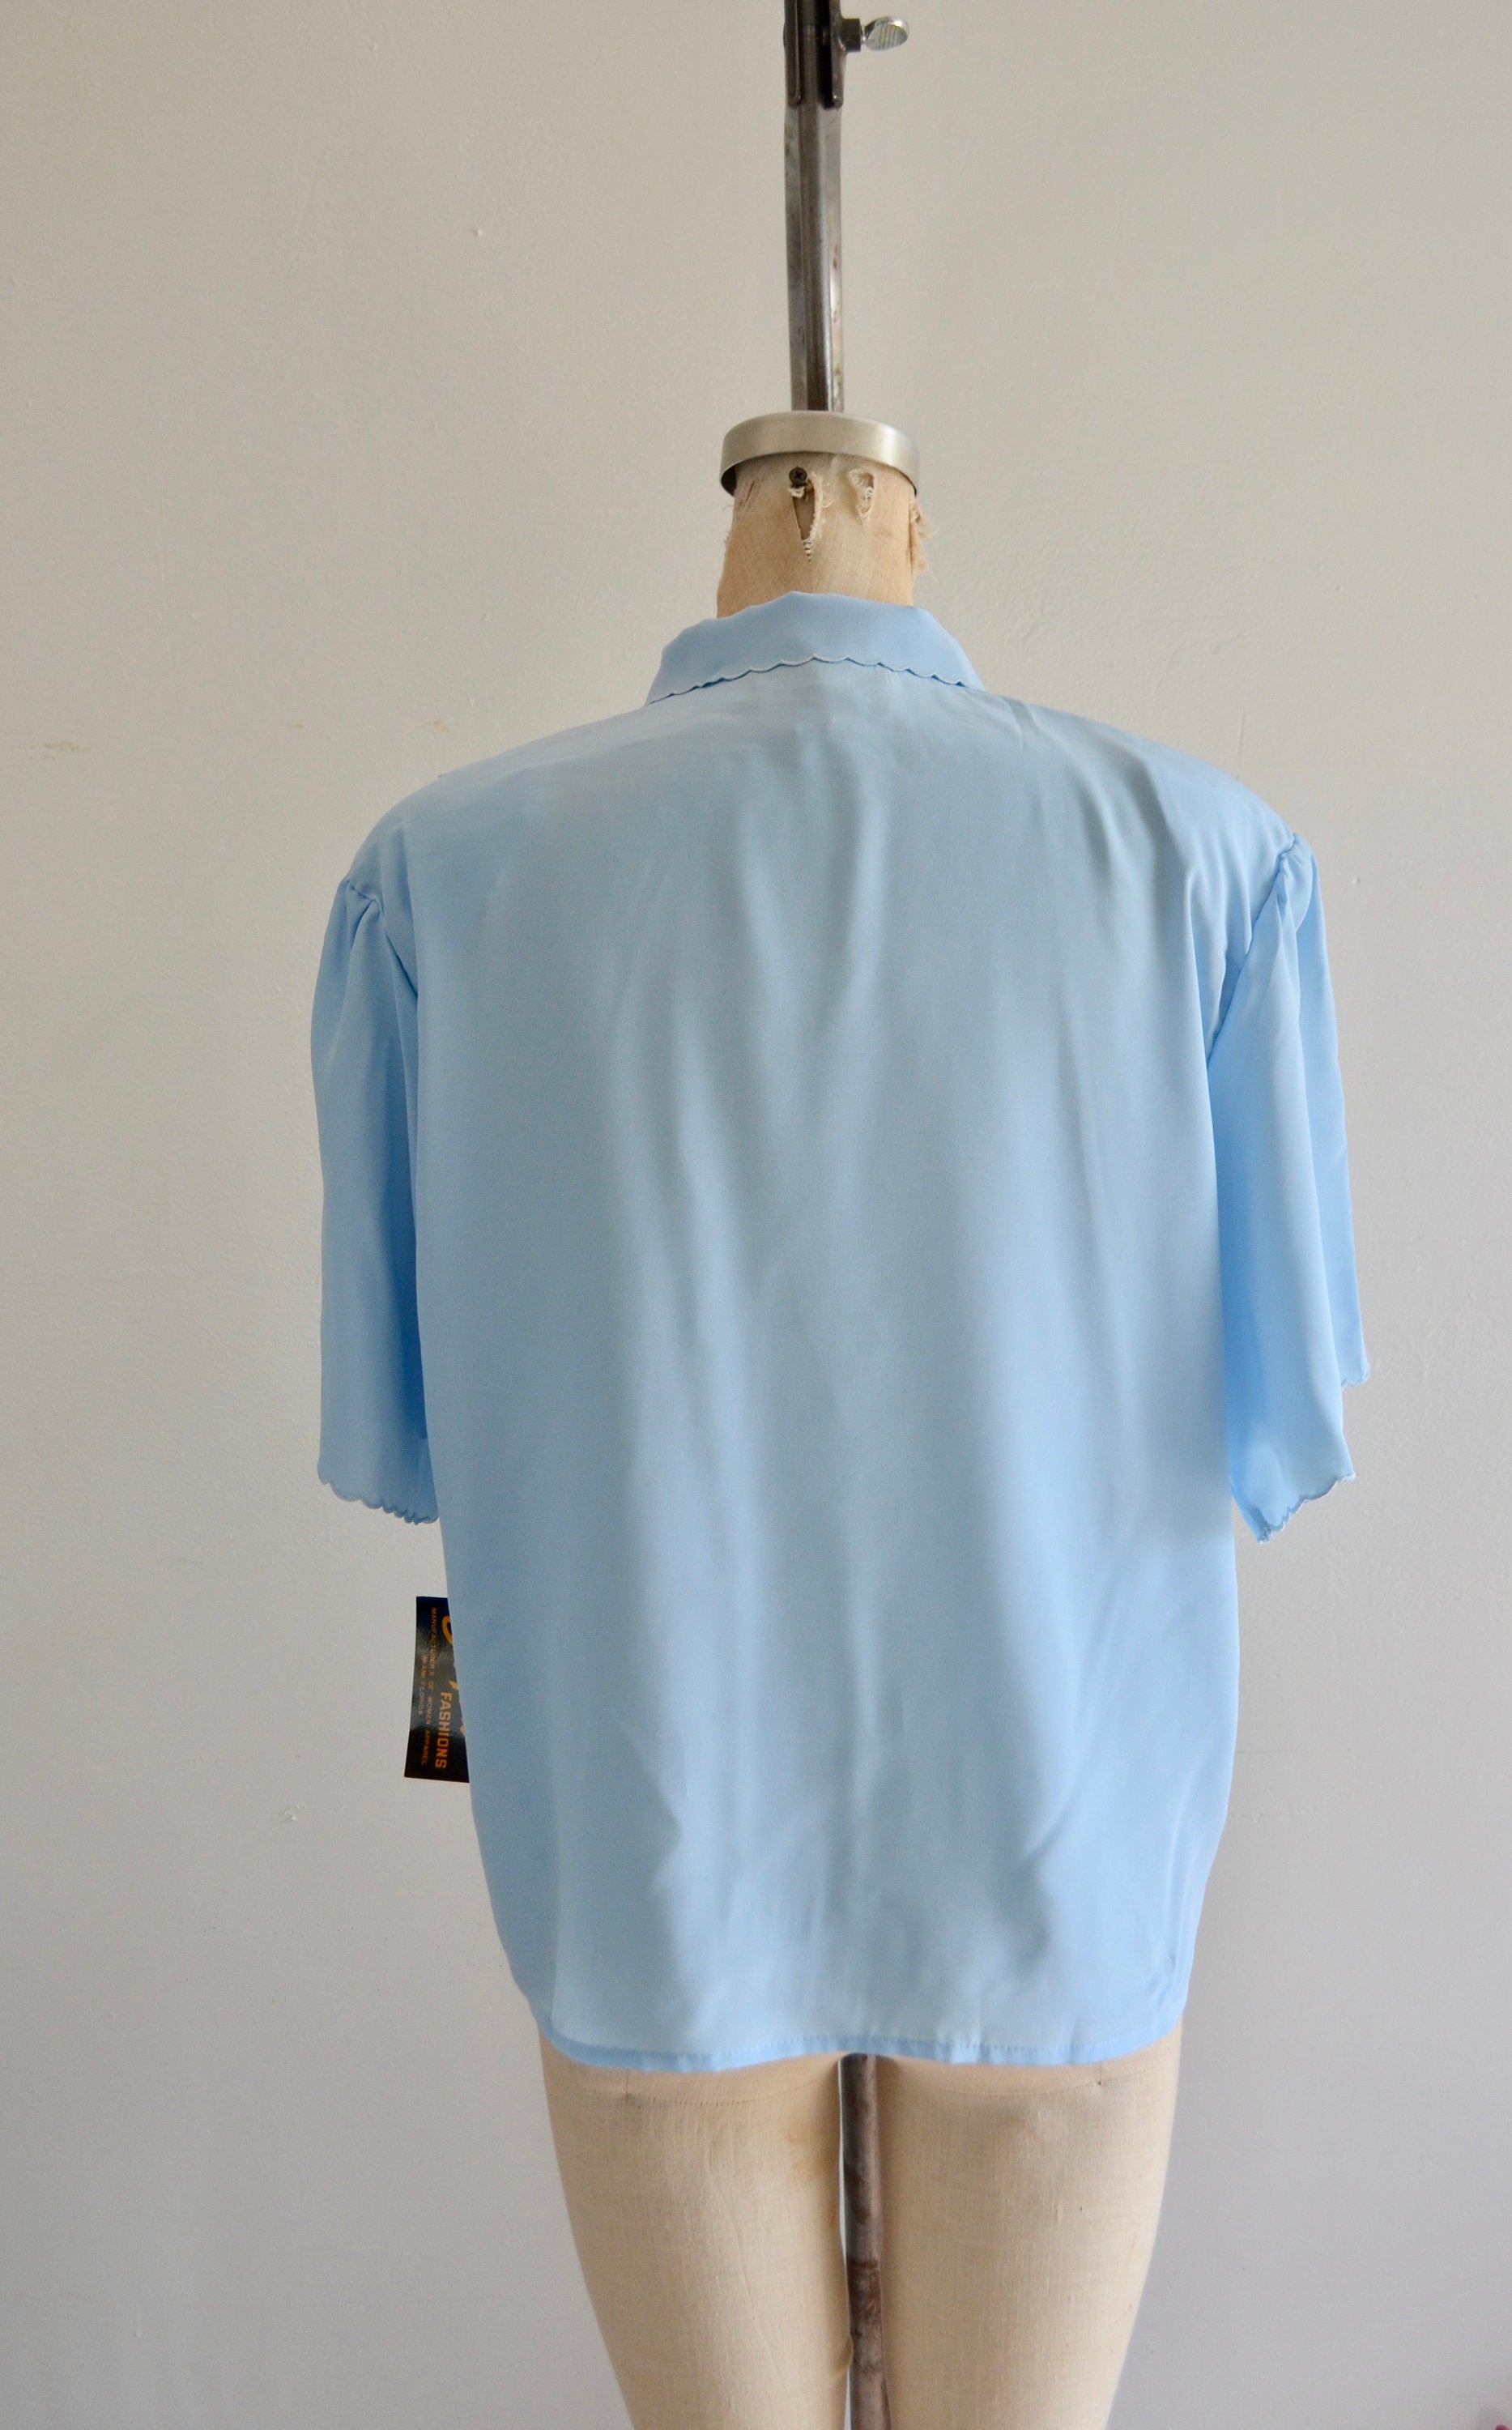 Nwt 90S Sassy Doll Light Blue Laser Cut Front Top Guipure Lace Collar Blouse Button Shirt